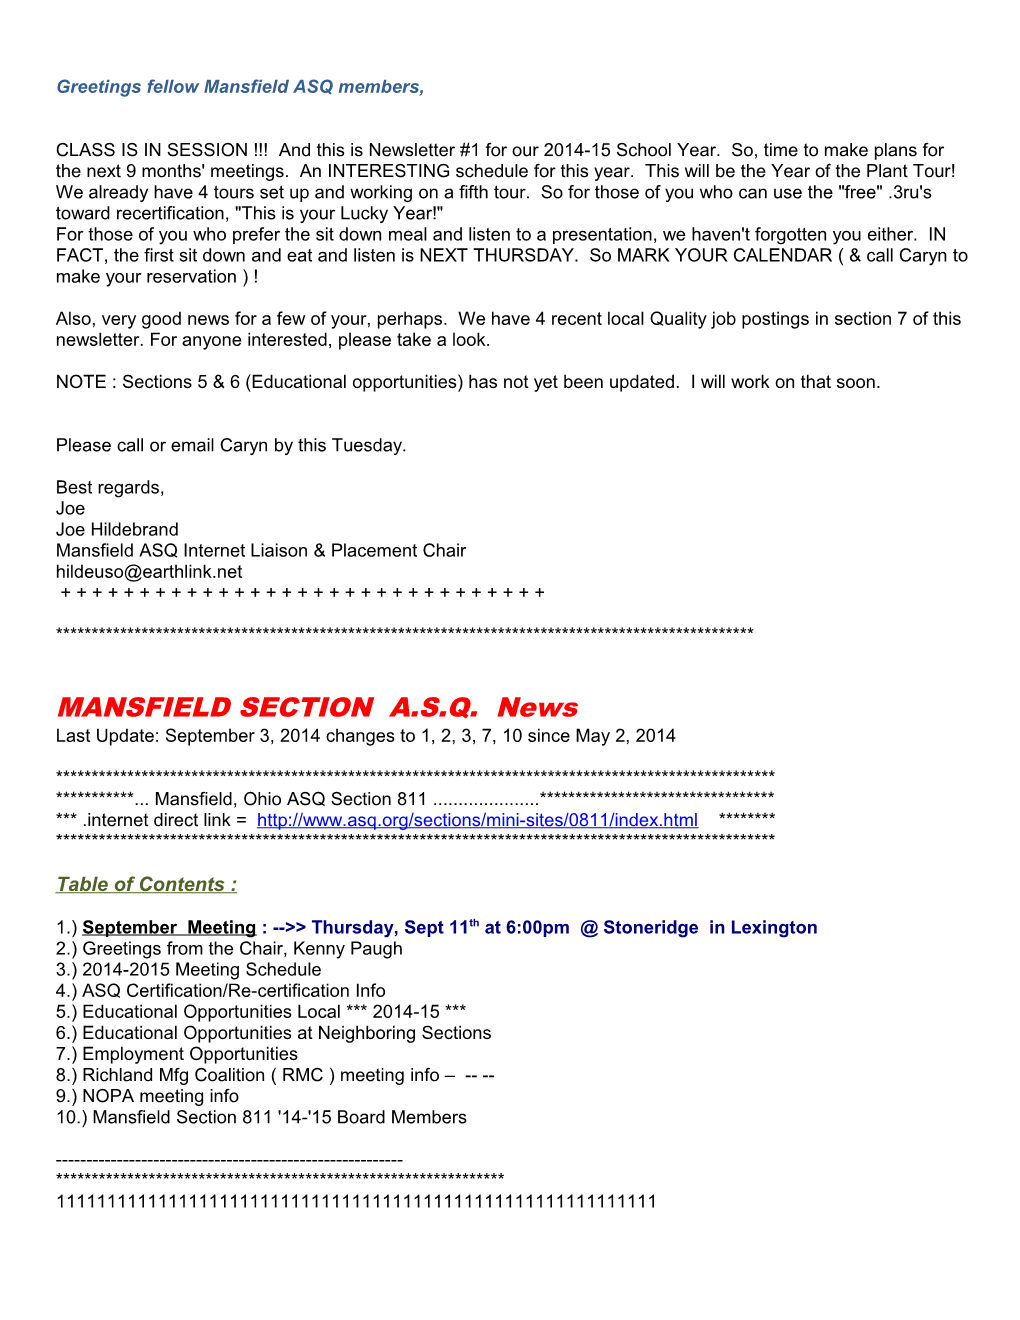 MANSFIELD SECTION COMMITTEE News